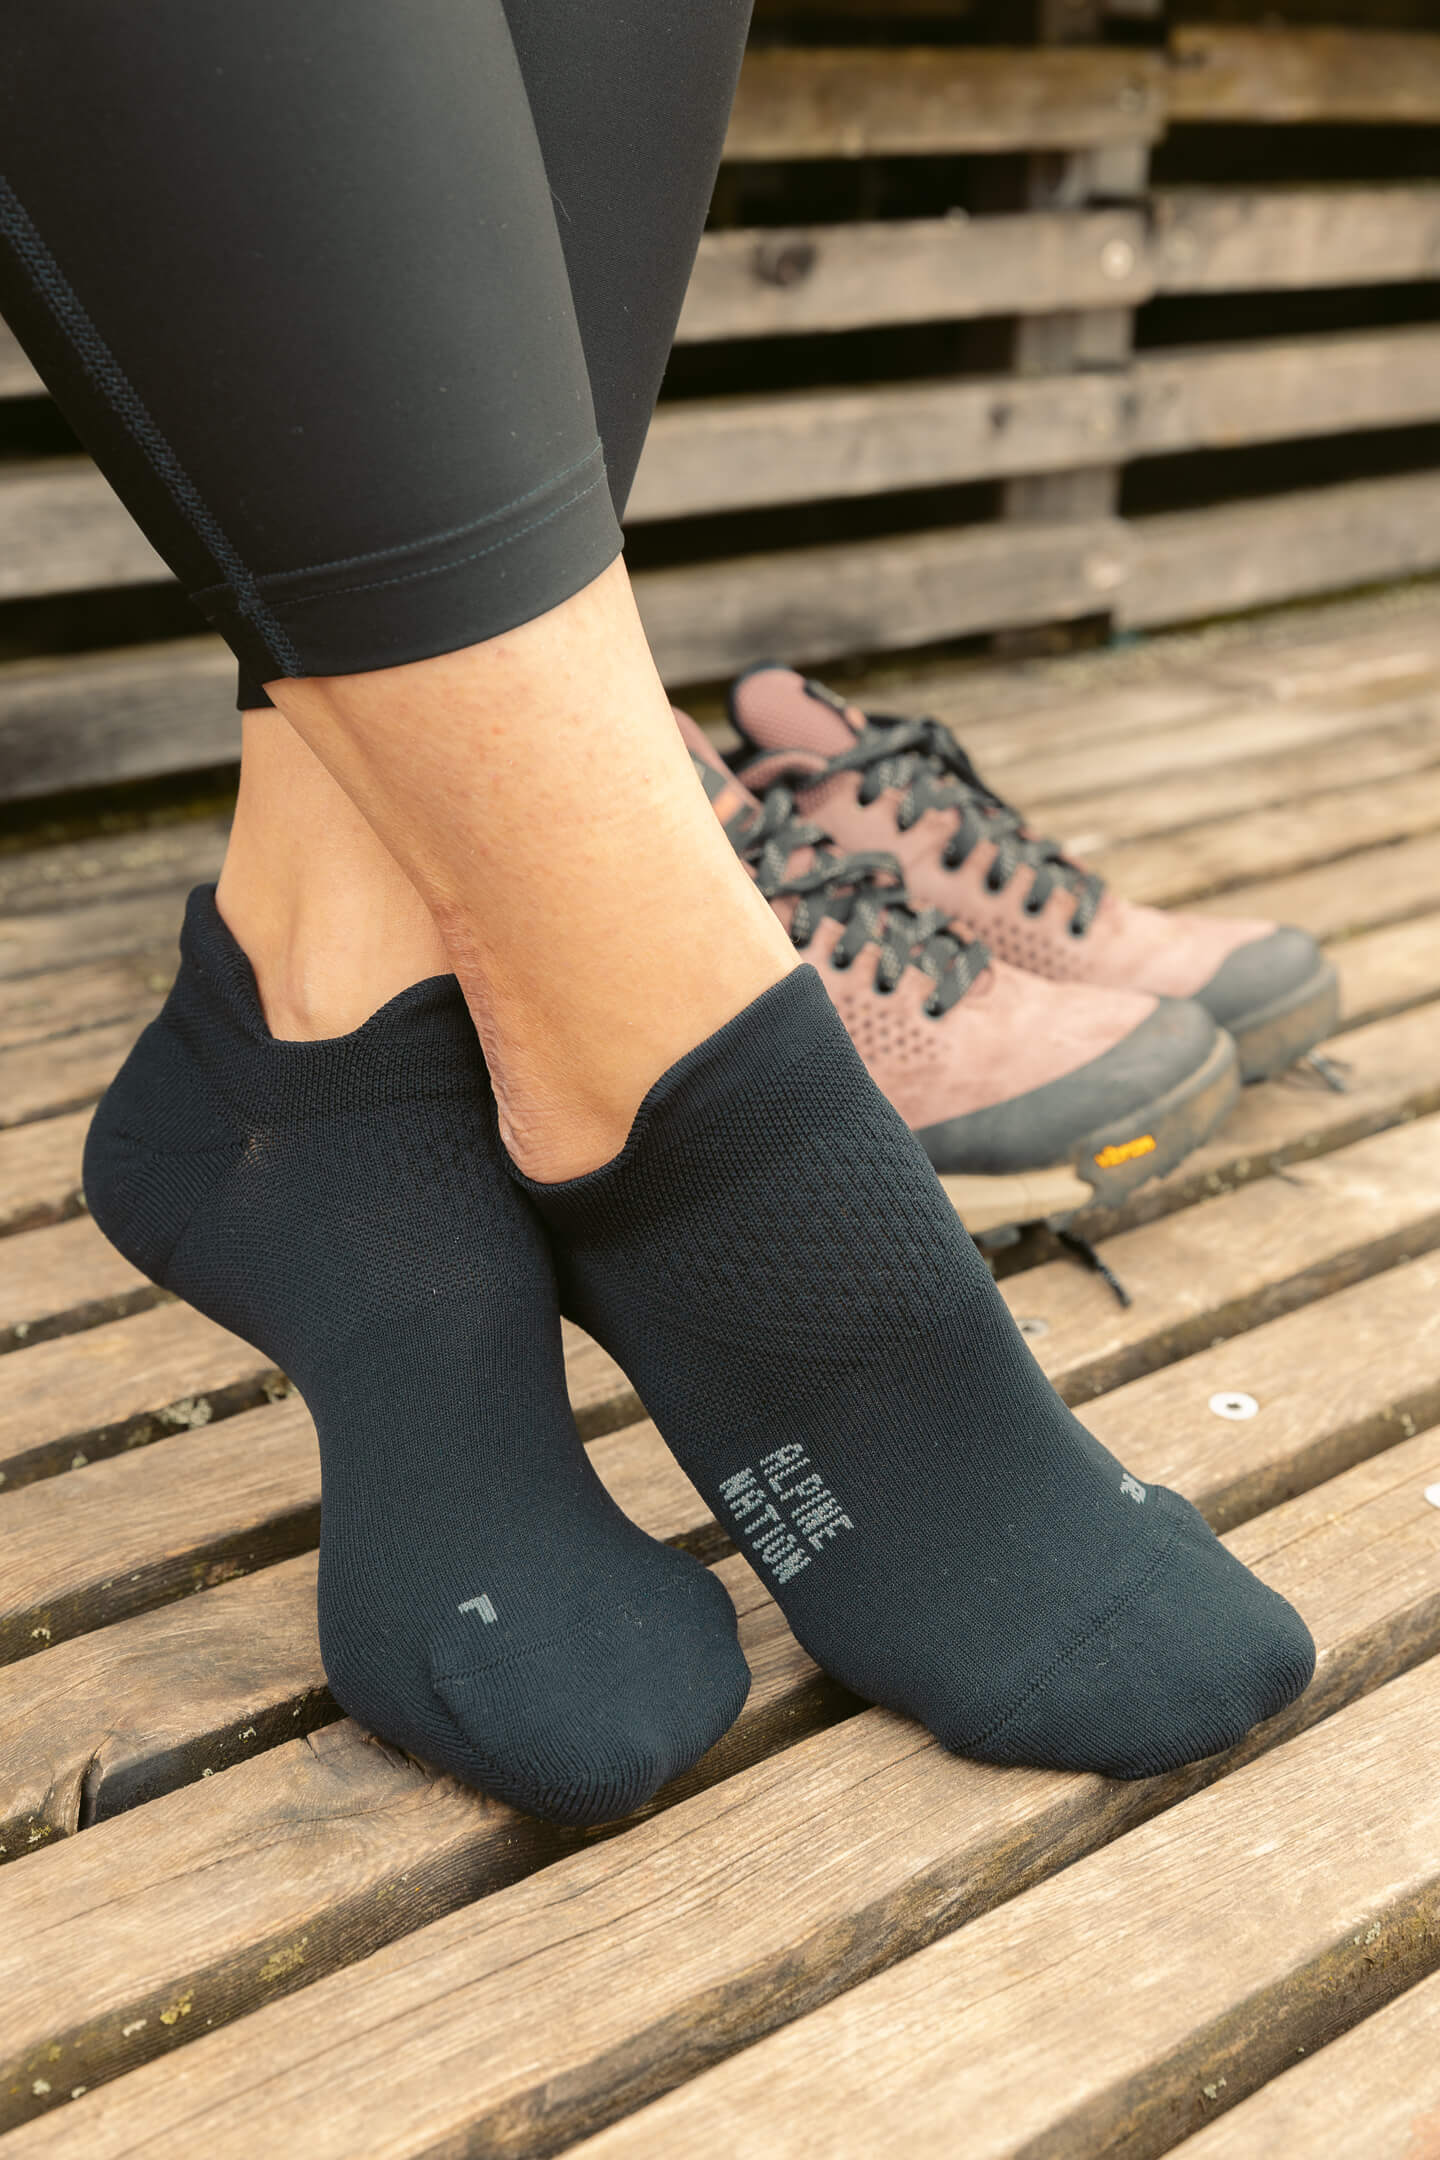 Tights and Ankle Socks For Women